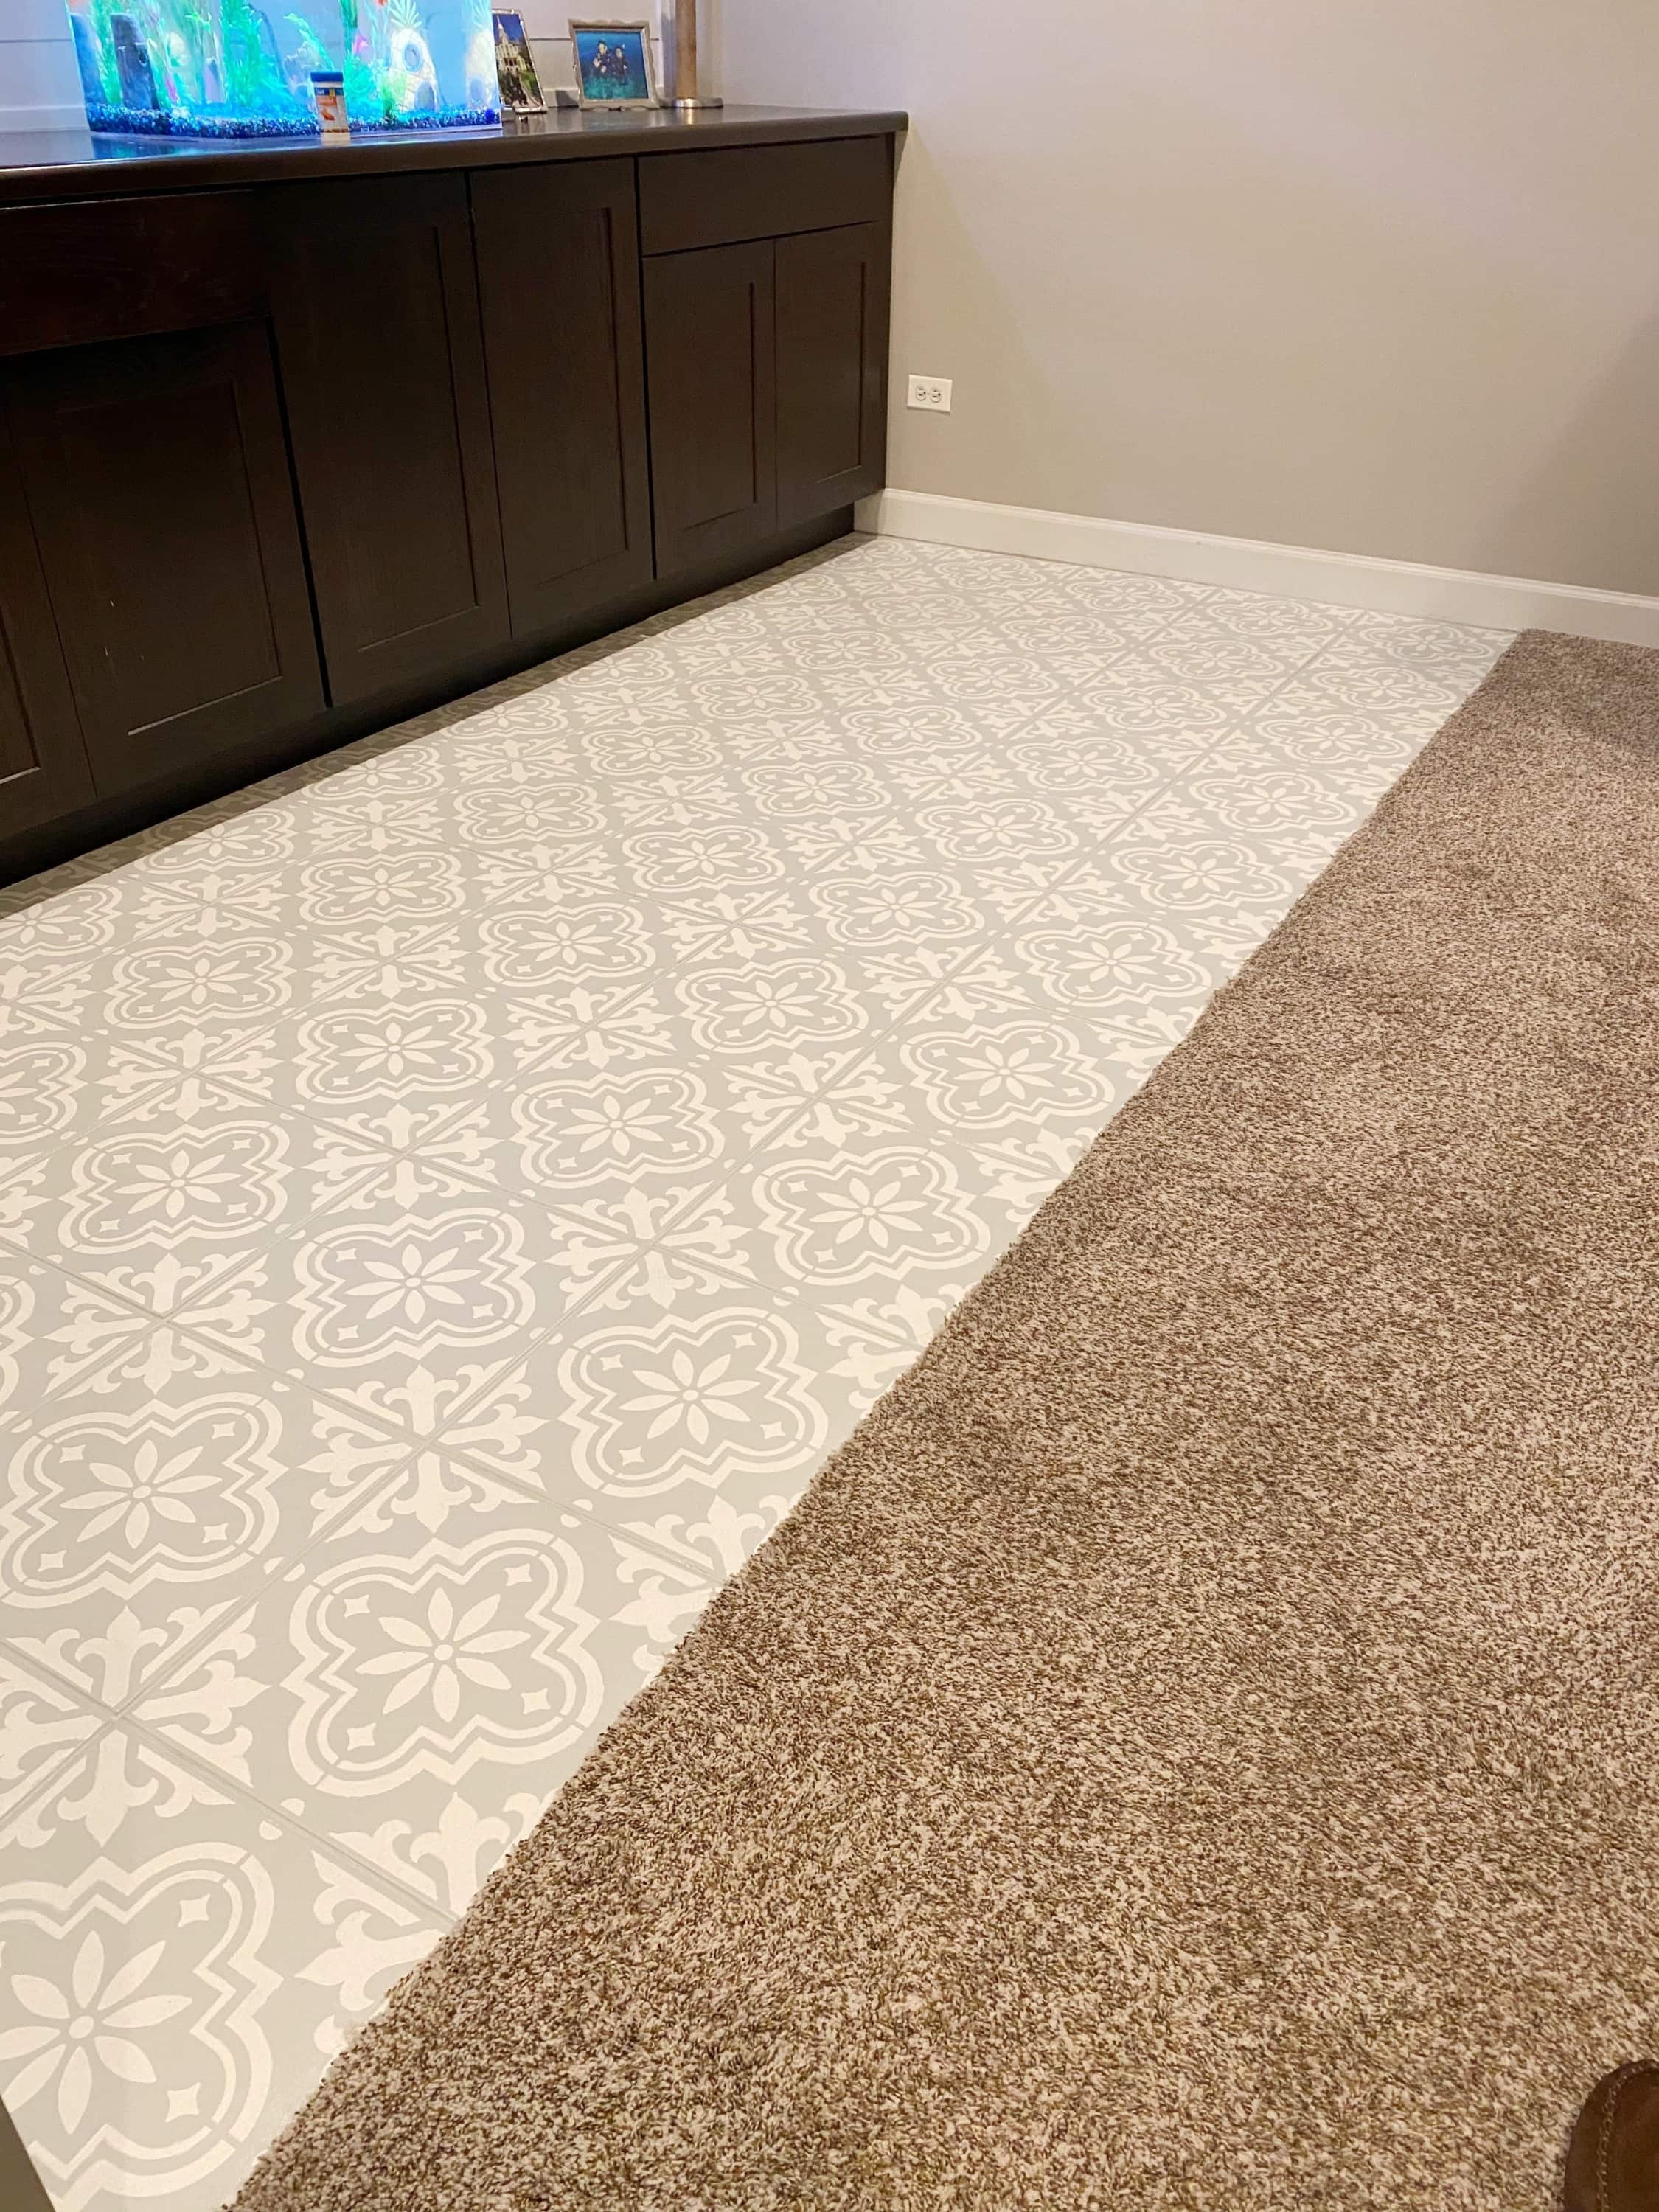 painted tile floor is a good beginner home projects